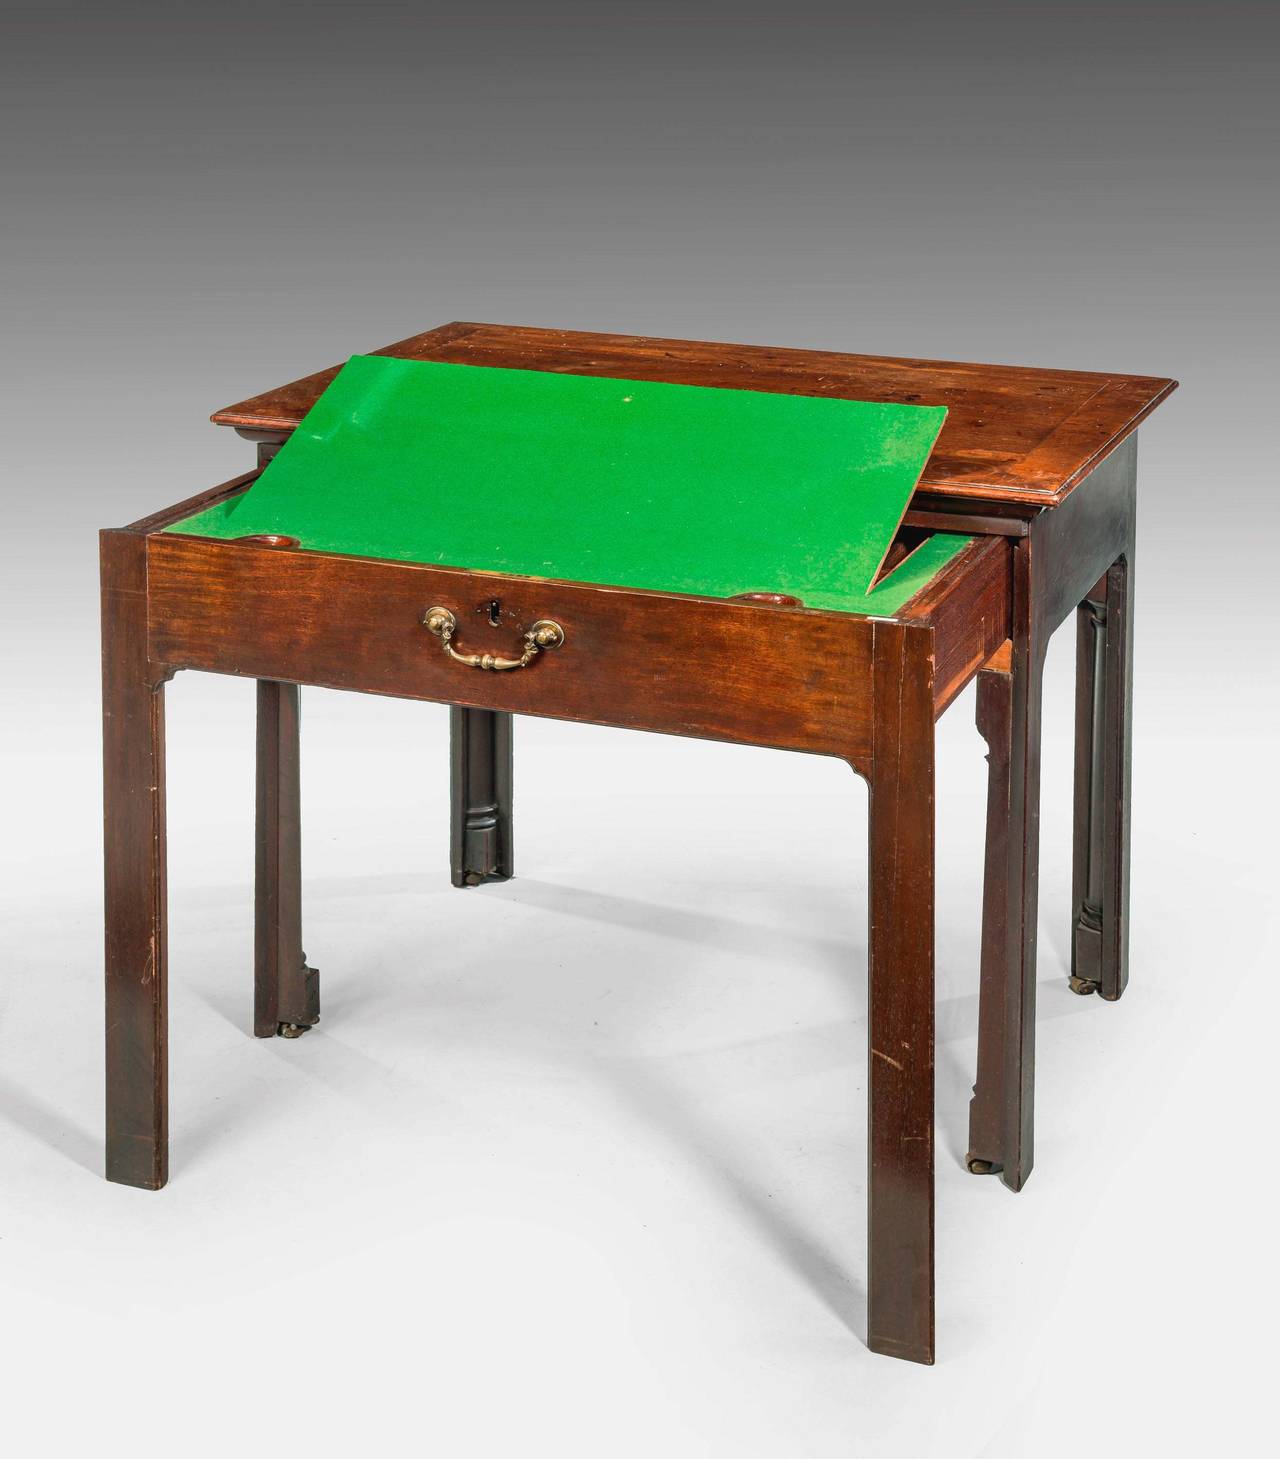 Chippendale Period Mahogany Architects Table 1